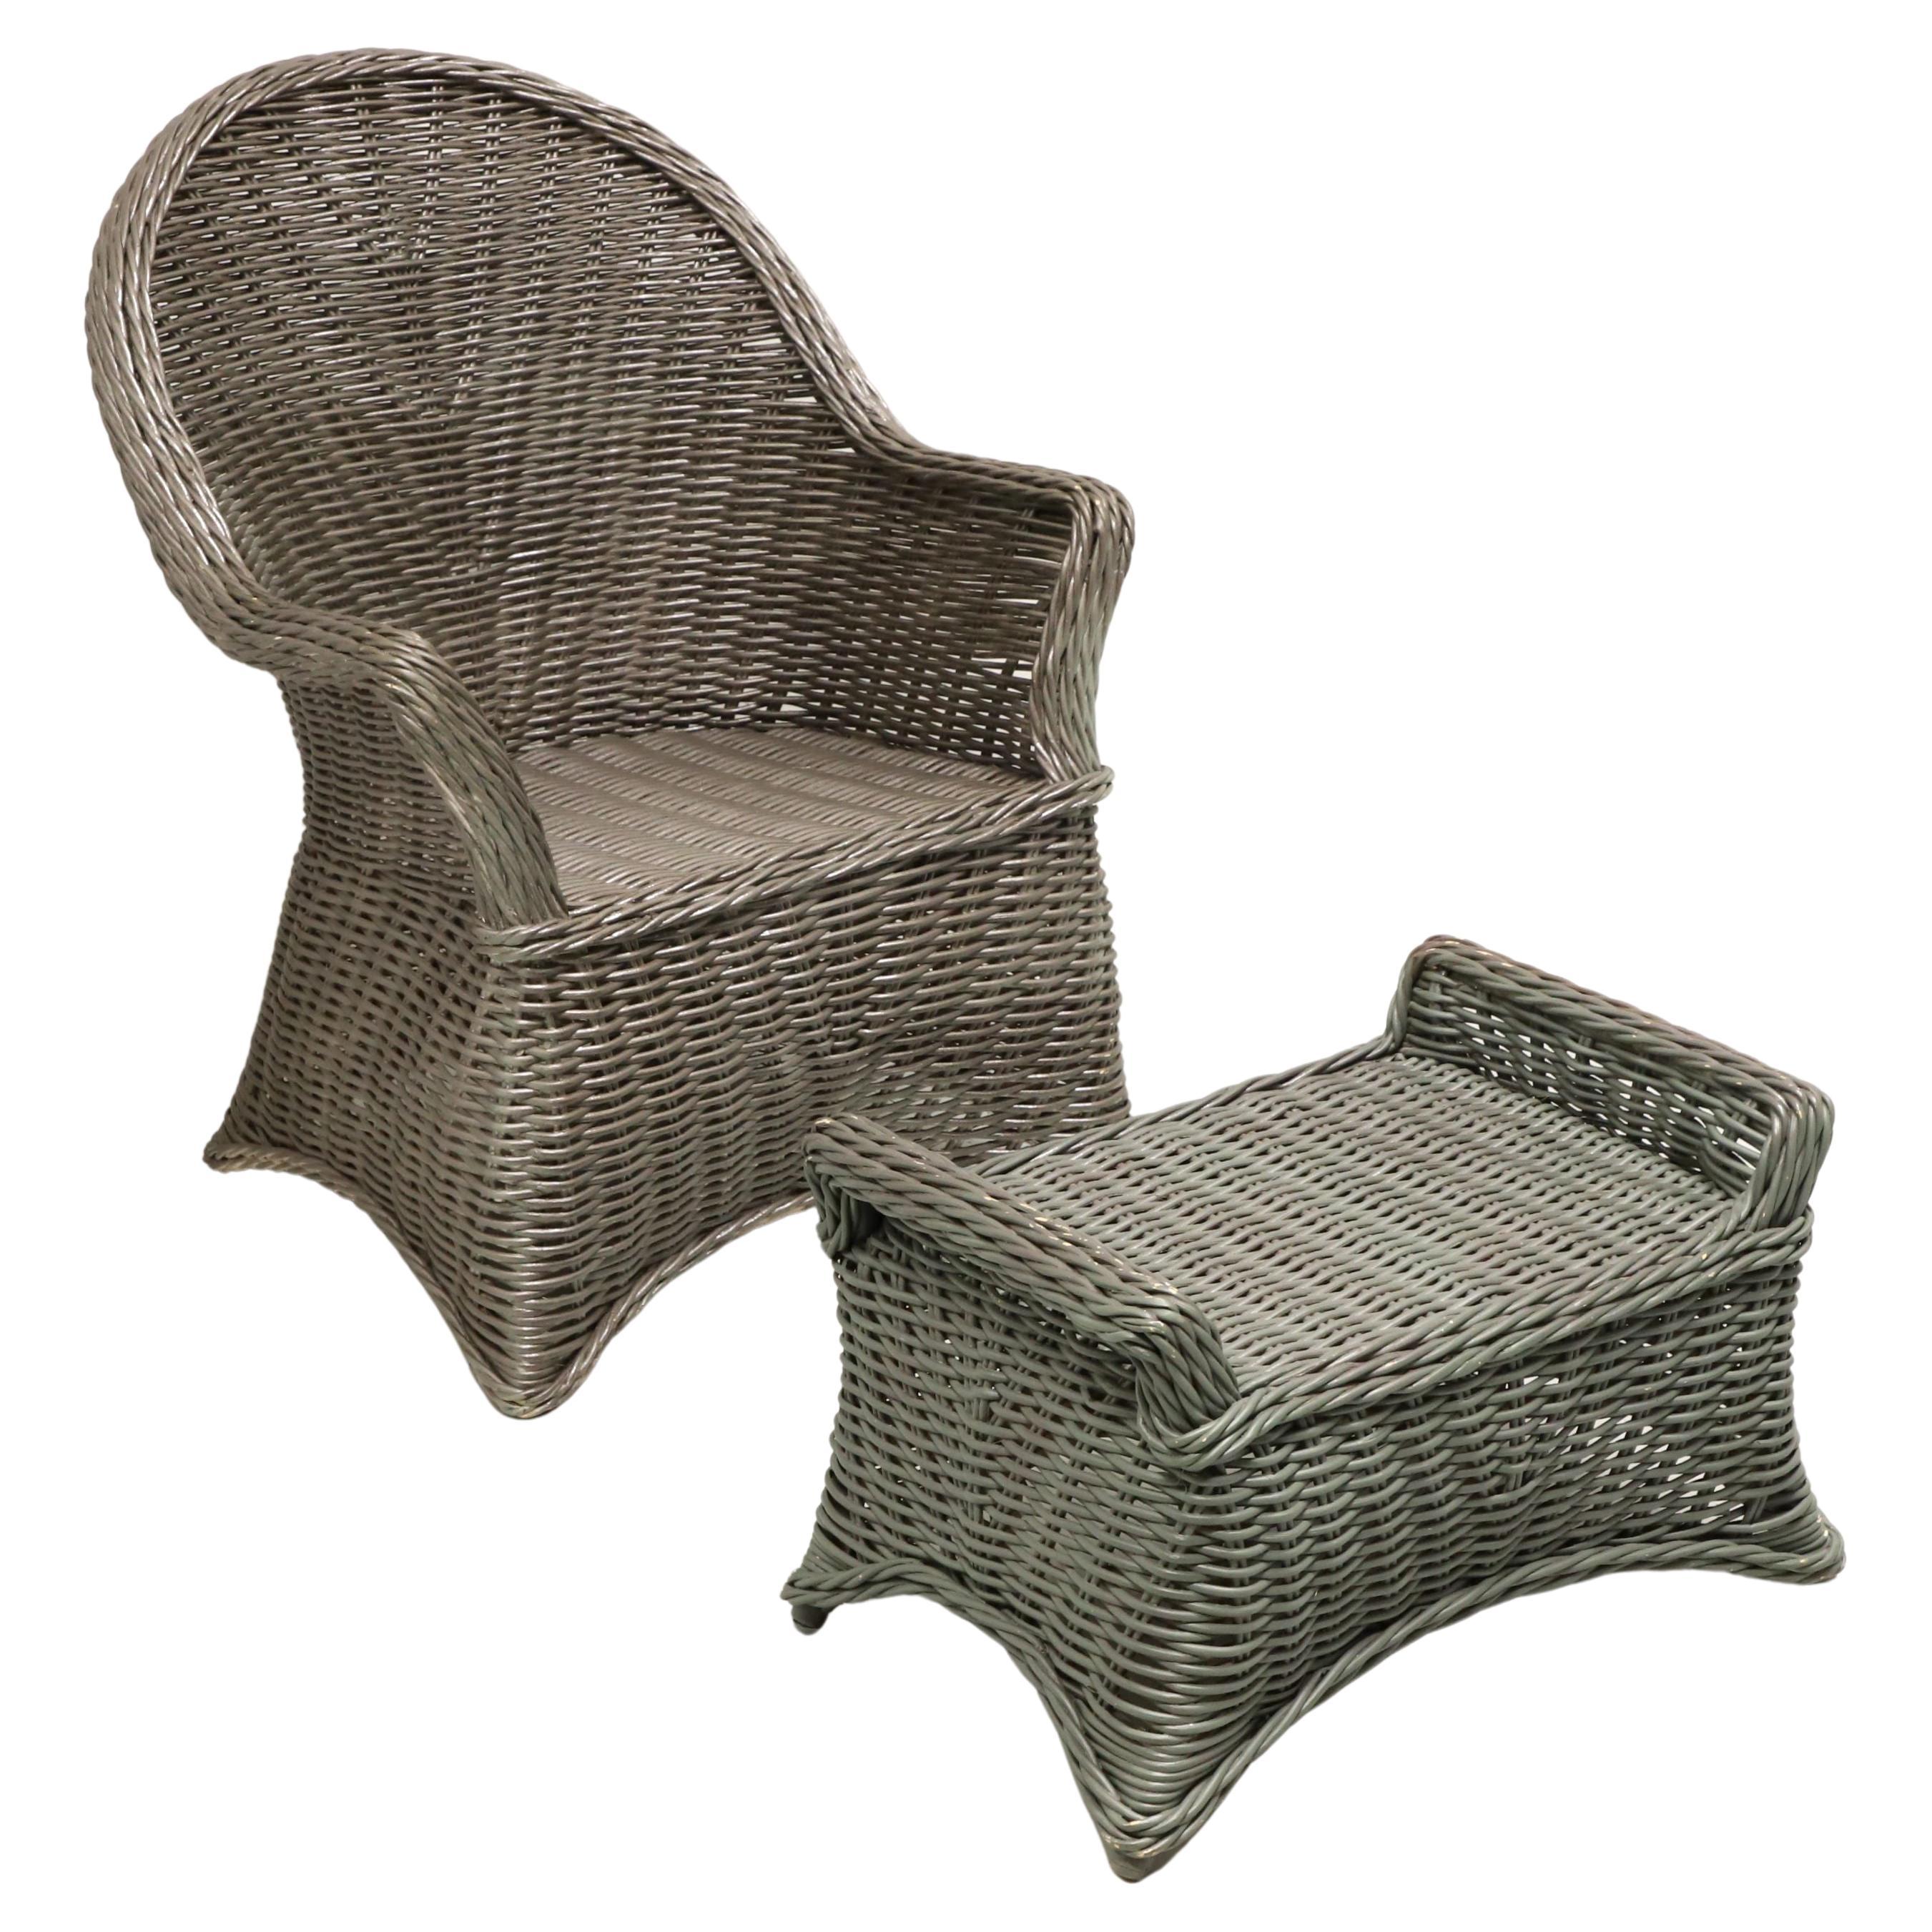 Mid 20th Century Victorian Wicker Armchair and Ottoman For Sale